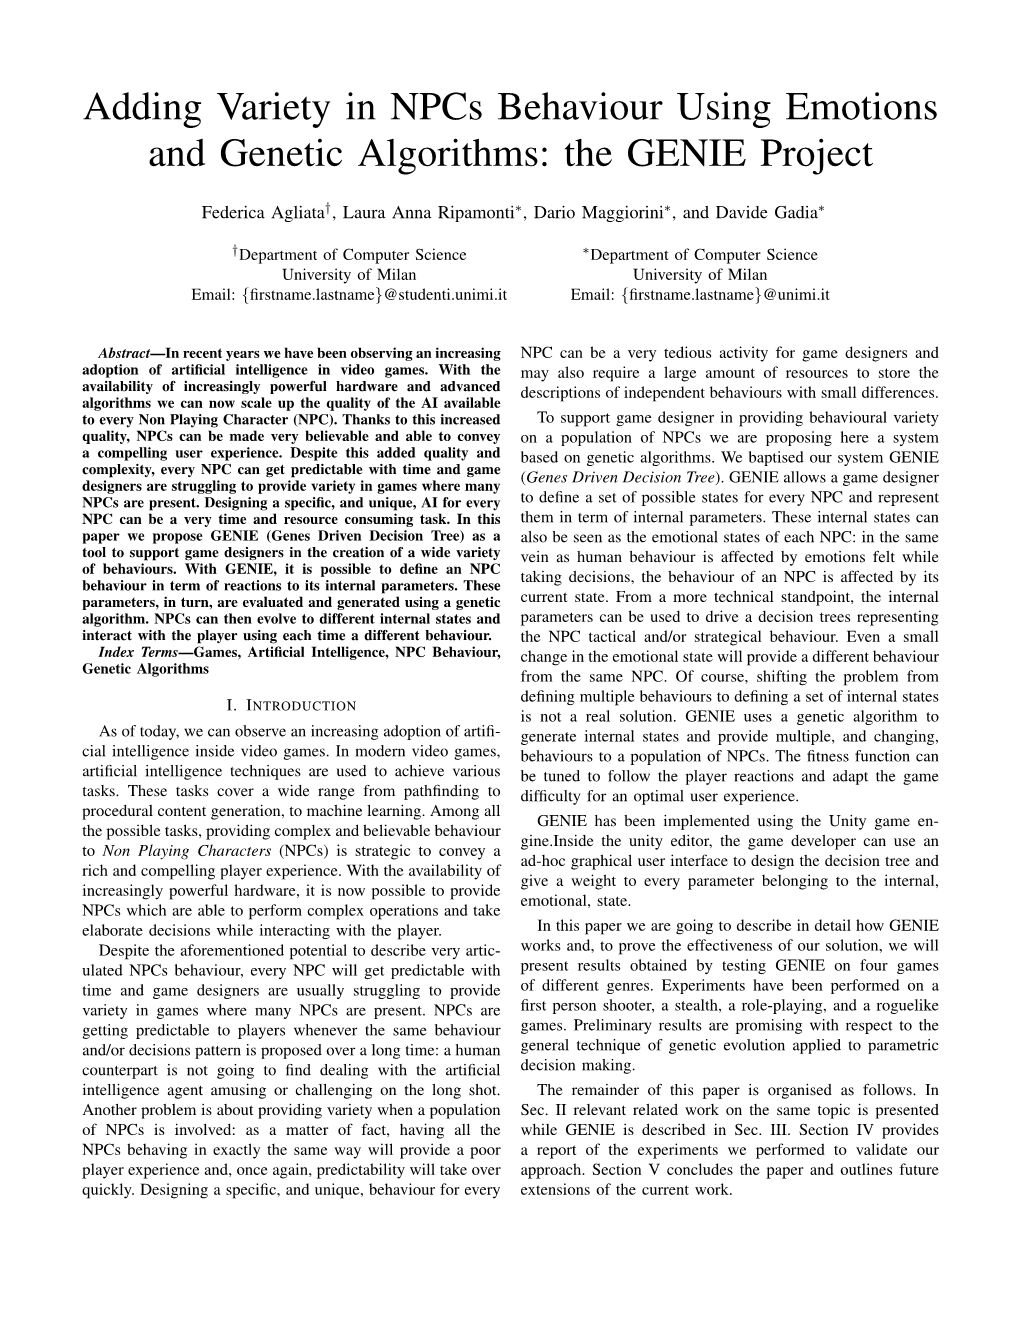 Adding Variety in Npcs Behaviour Using Emotions and Genetic Algorithms: the GENIE Project